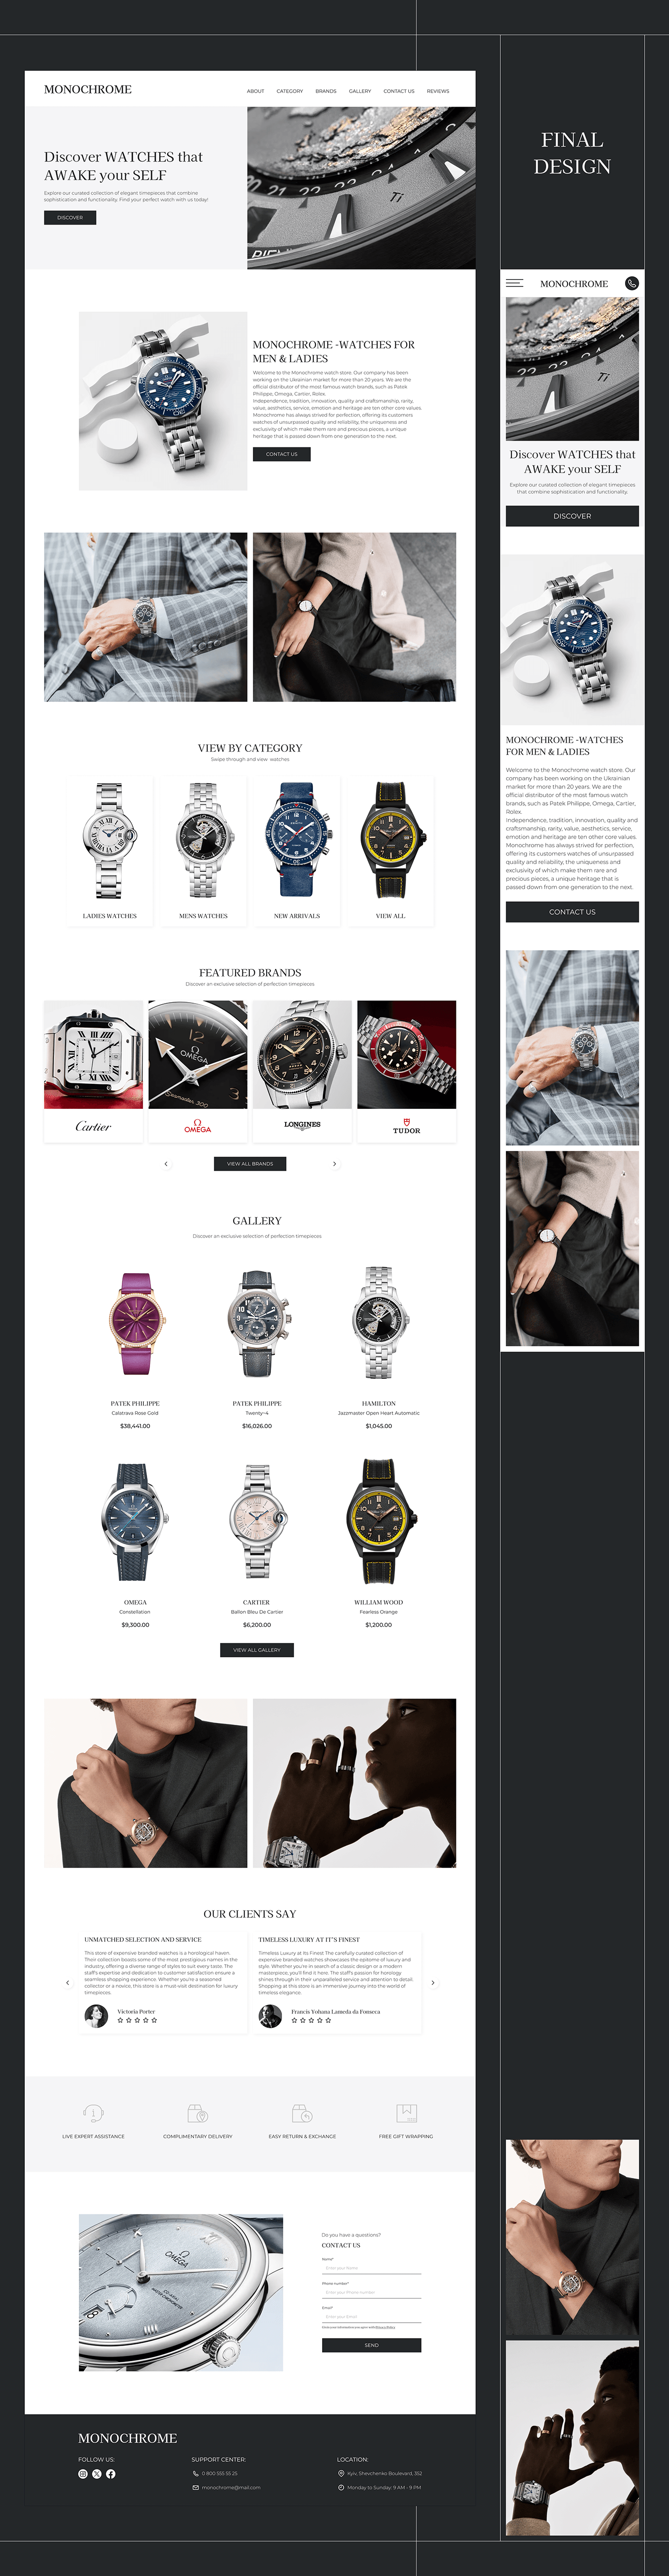 watch design landing page Web Design  mobile adaptation Website Figma UI/UX user interface user experience